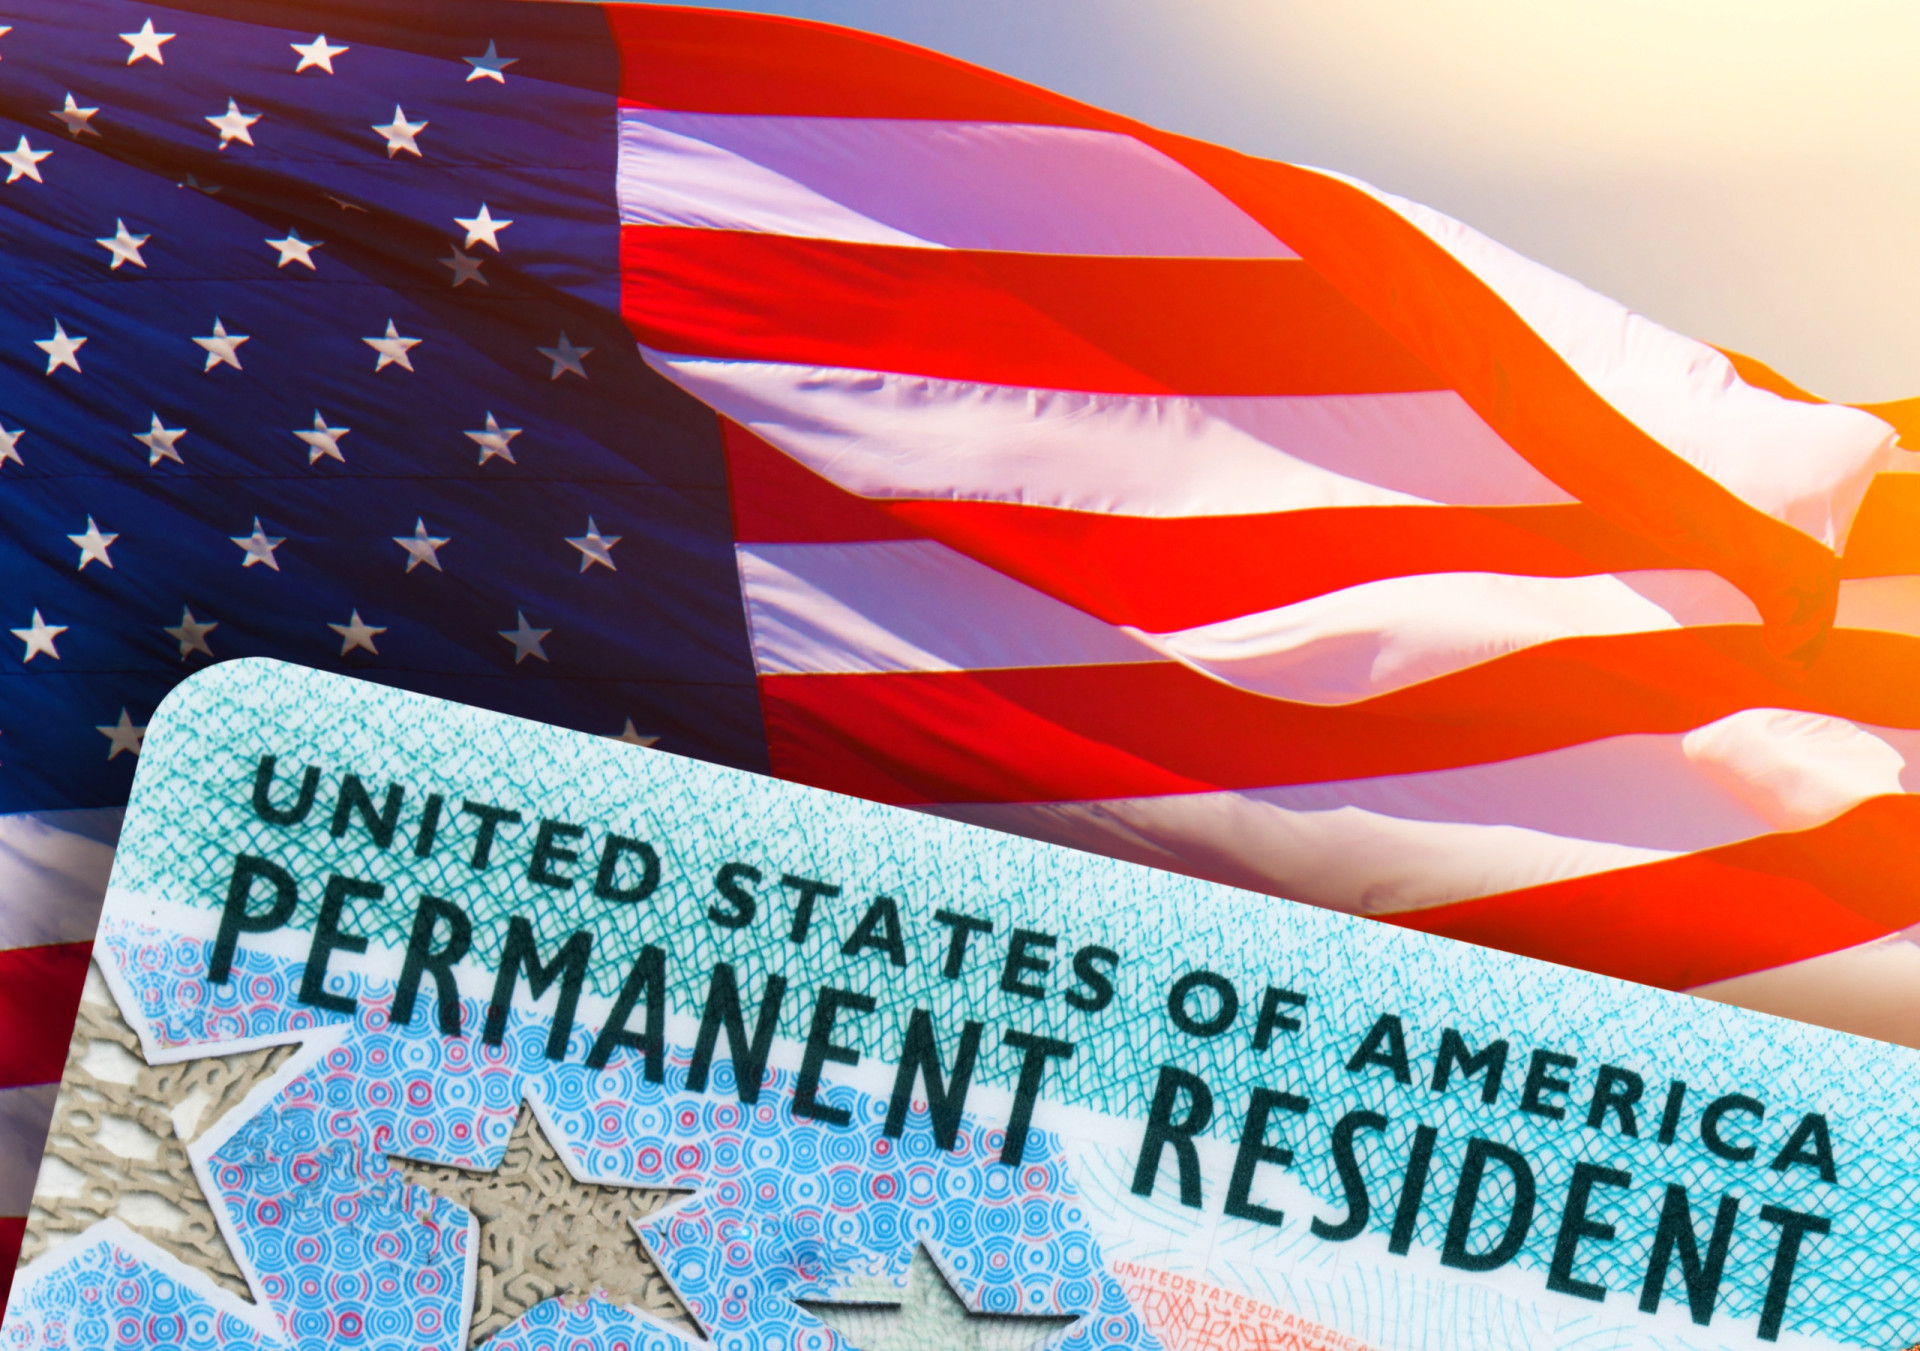 <p>If you're thinking about residing permanently in America and aren't a citizen, you'll need a green card to do so. A green card is an identity document that affords holders lawful permanent <a href="https://www.starsinsider.com/celebrity/508994/famous-immigrants-who-make-america-great" rel="noopener">residency</a> in the United States. It's a coveted document and the process involved in applying for one is long and complicated. The benefits of carrying a green card, however, far outweigh the paperwork involved. And if your eventual aim is to gain full citizenship, then possessing this much sought-after ID provides an essential avenue towards achieving that goal. So, are you looking to live stateside?</p> <p>Click through and find out more about how to obtain an American green card.</p><p>You may also like:<a href="https://www.starsinsider.com/n/71584?utm_source=msn.com&utm_medium=display&utm_campaign=referral_description&utm_content=721230en-us"> Can you recognize these actors?</a></p>